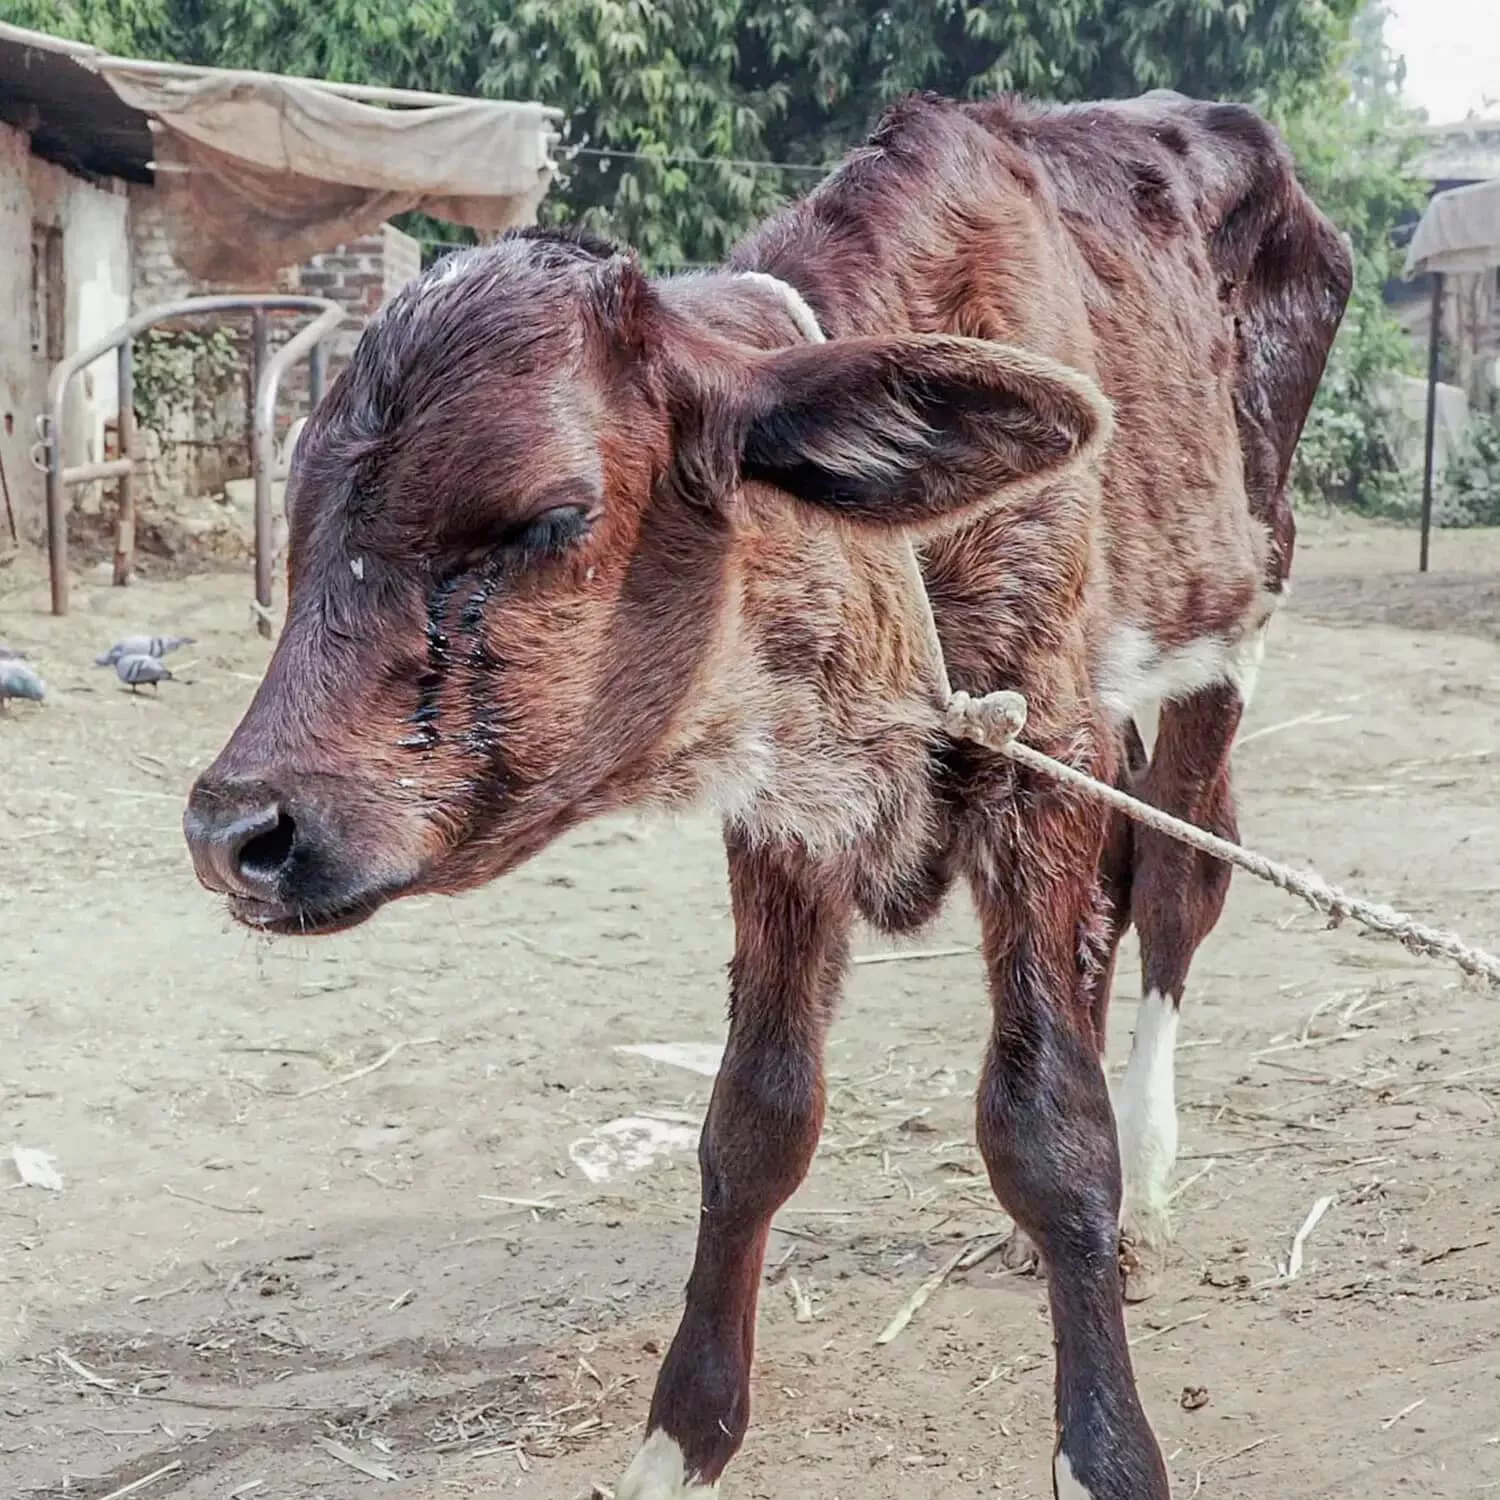 calf crying with rope tied around their neck